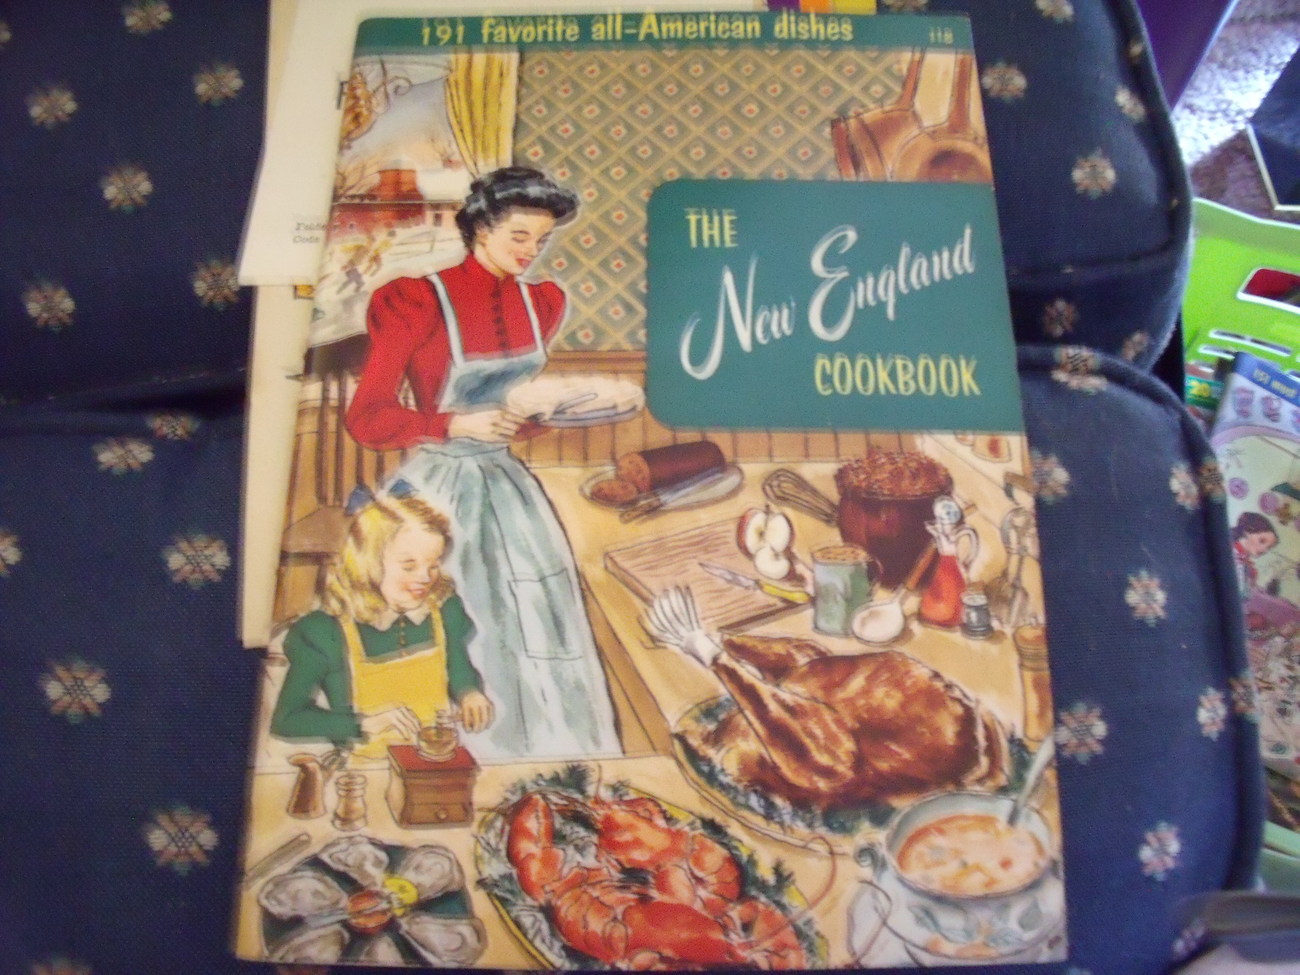 1956 The New England Cookbook of 191 recipes from Culinary Arts Institute - $8.00